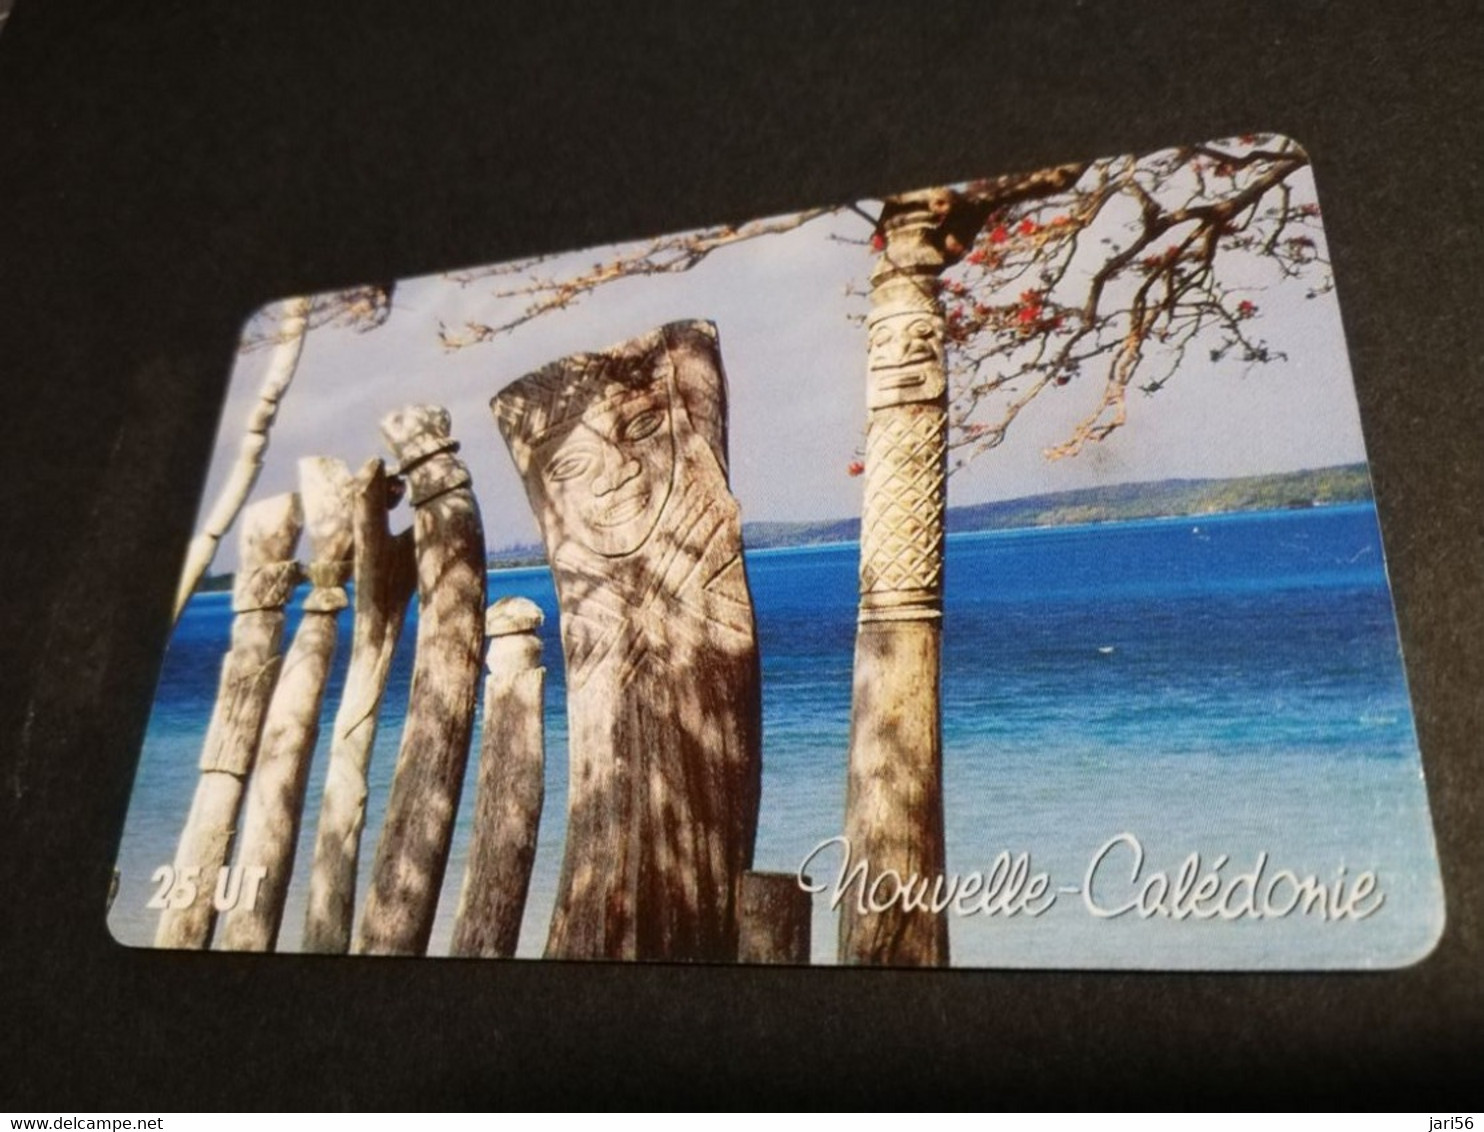 NOUVELLE CALEDONIA  CHIP CARD 25  UNITS  CARVED TREES AT BEACH         ** 4193 ** - Nieuw-Caledonië